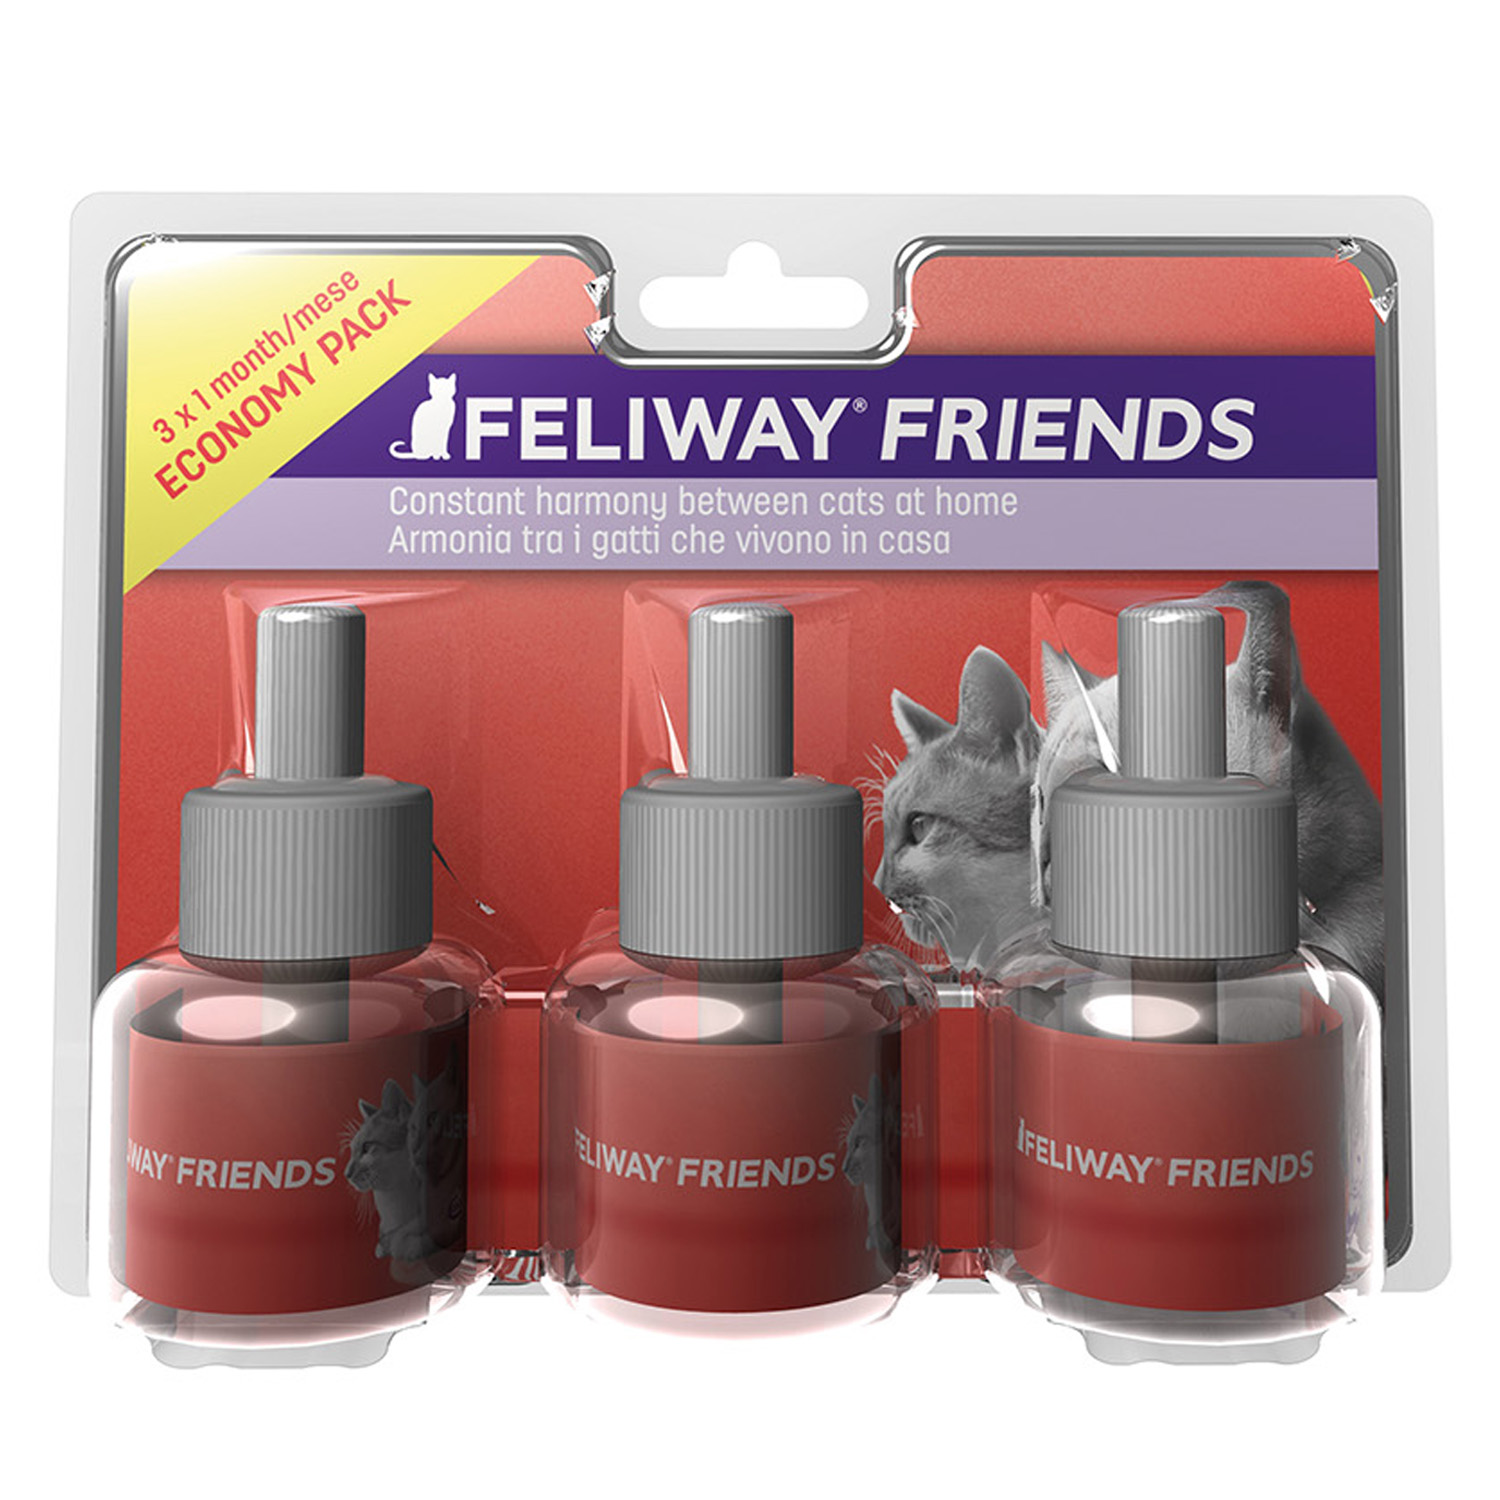 FELIWAY FRIENDS DIFFUSER REFILL REFILL ECONOMY X 3 PACK